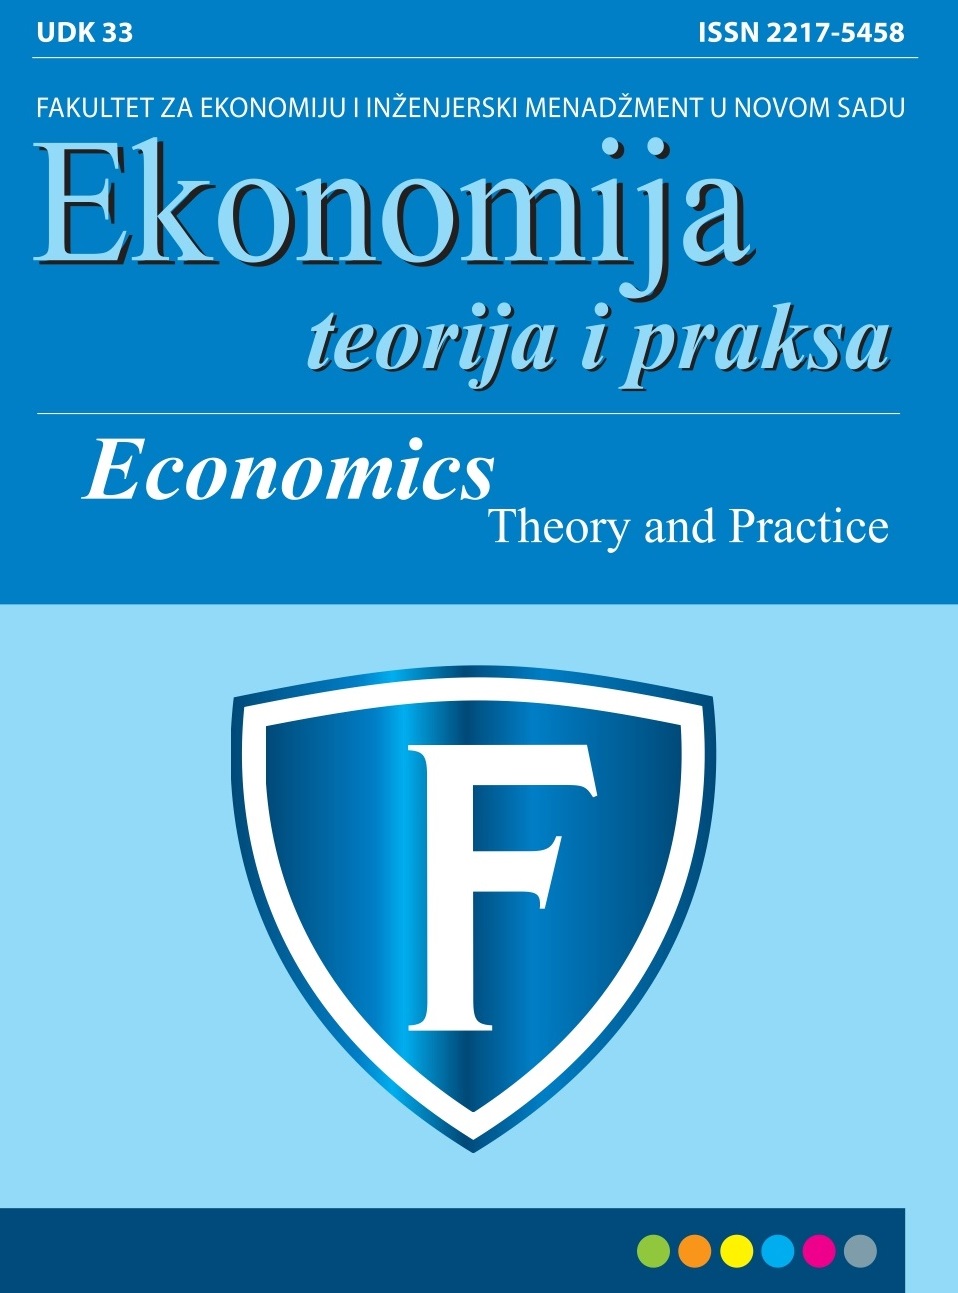 					View Vol. 13 No. 4 (2020): Economics - Theory and Practice
				